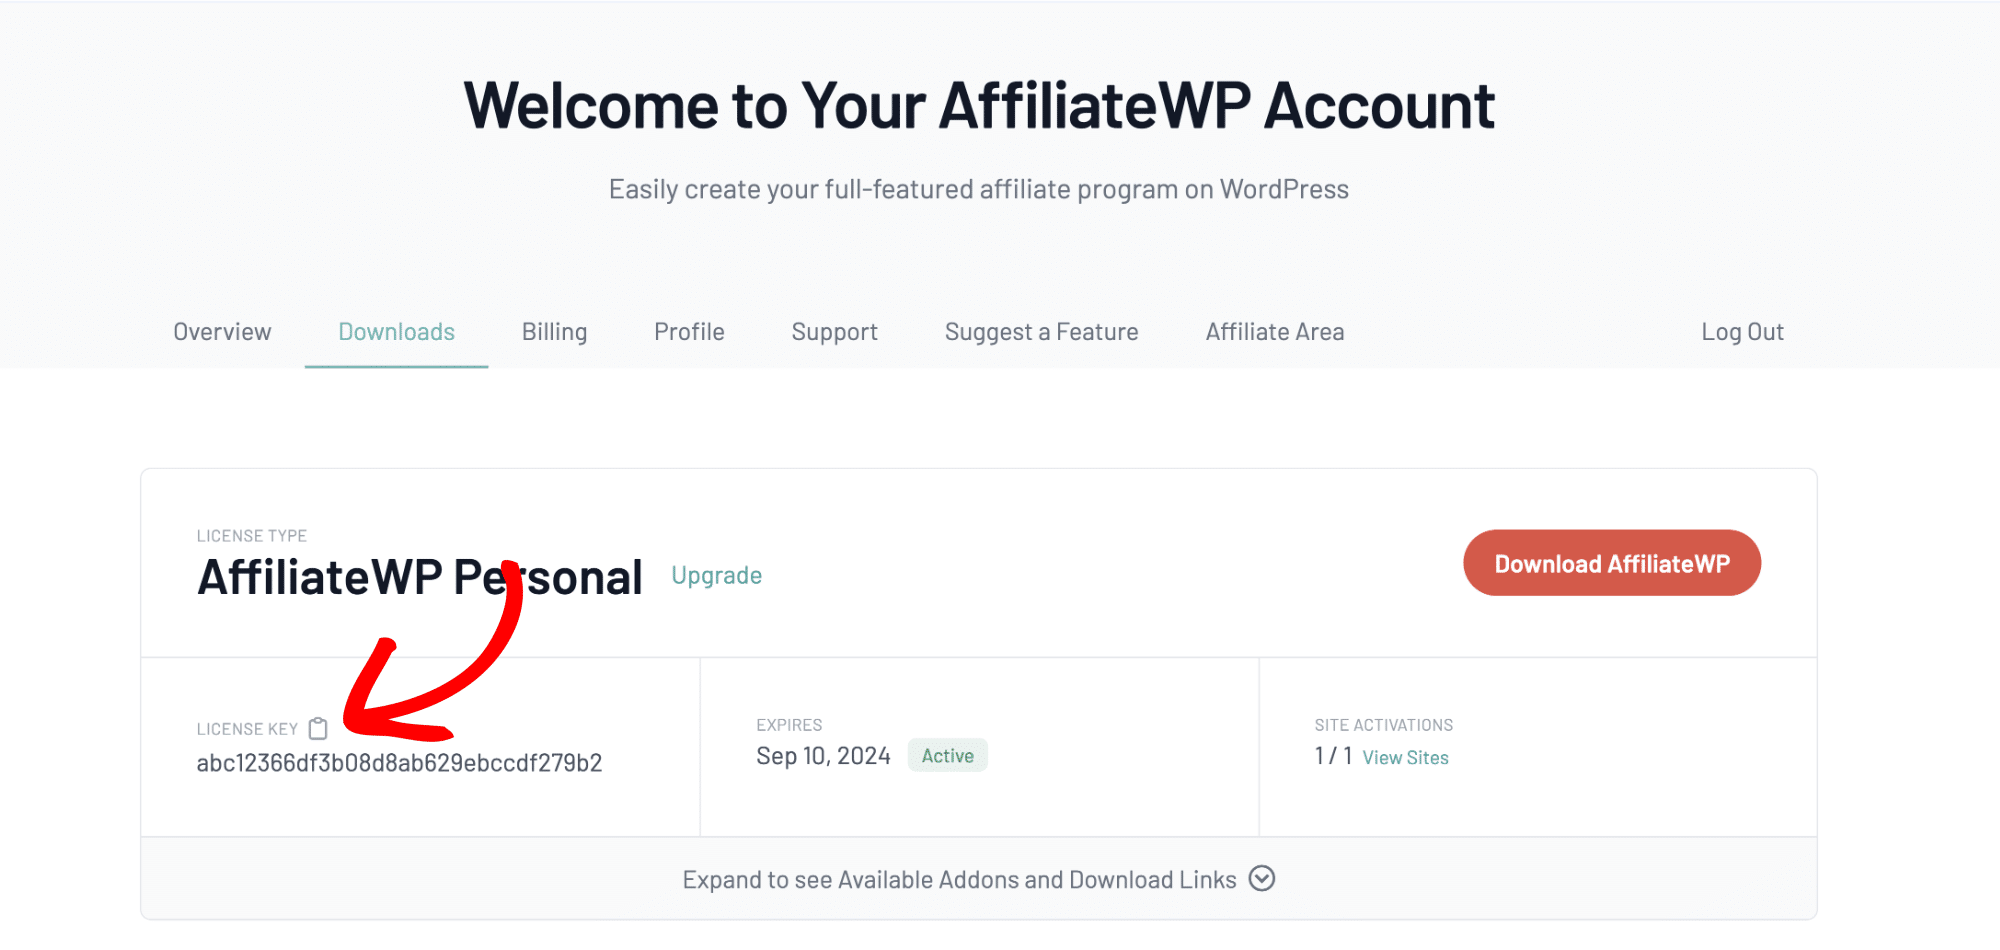 Copying a license key from the AffiliateWP Account page